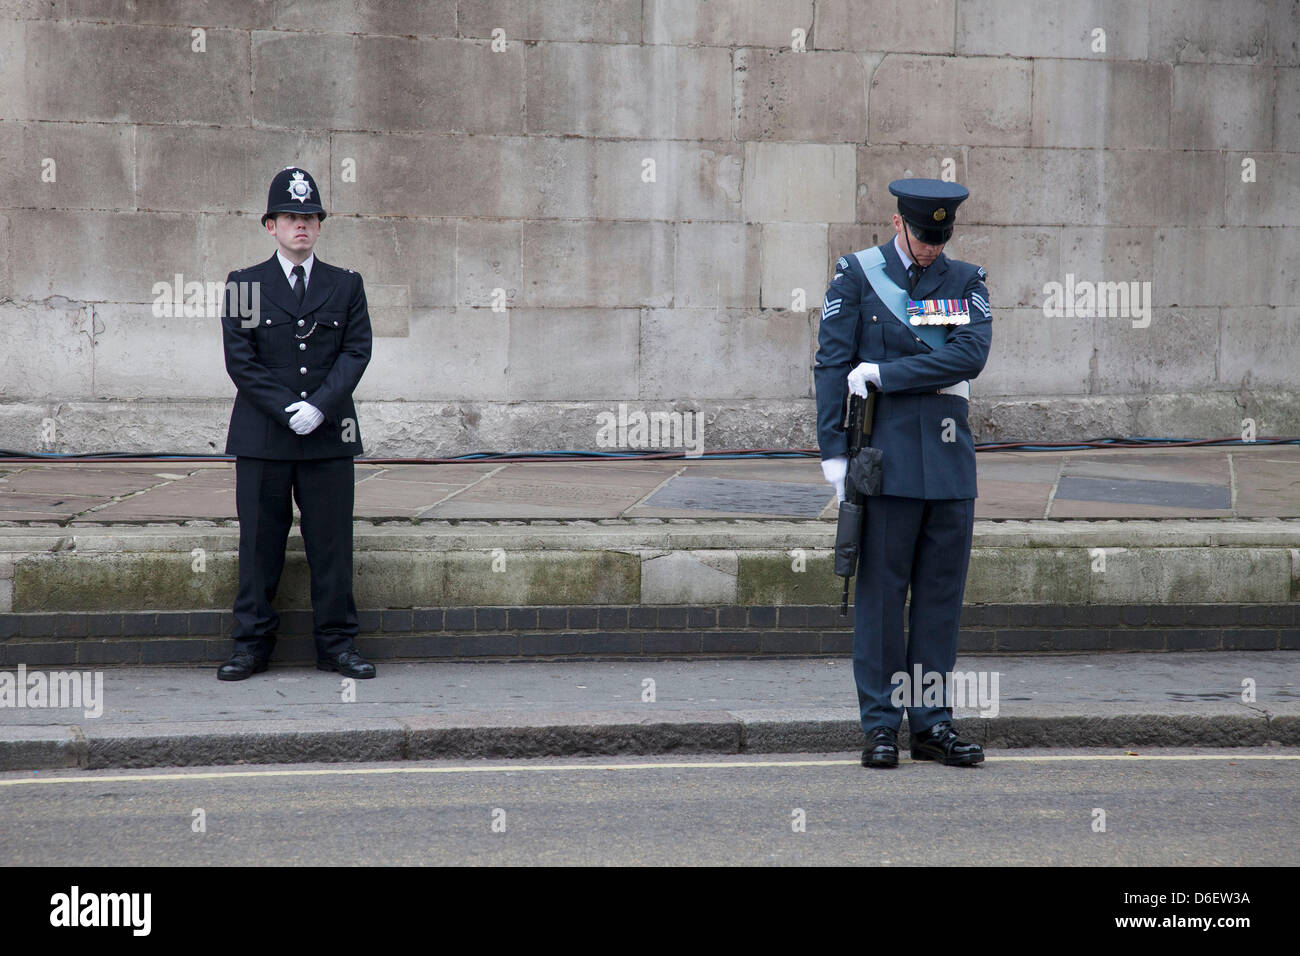 London , UK. 17th April 2013. The funeral of former Prime Minister Baroness Margaret Thatcher. Metropolitan police on duty outside St Clement Danes Church prior to the funeral. Security was high with various layer of the armed forces and emergency services all on hand. Credit: Michael Kemp/Alamy Live News Stock Photo